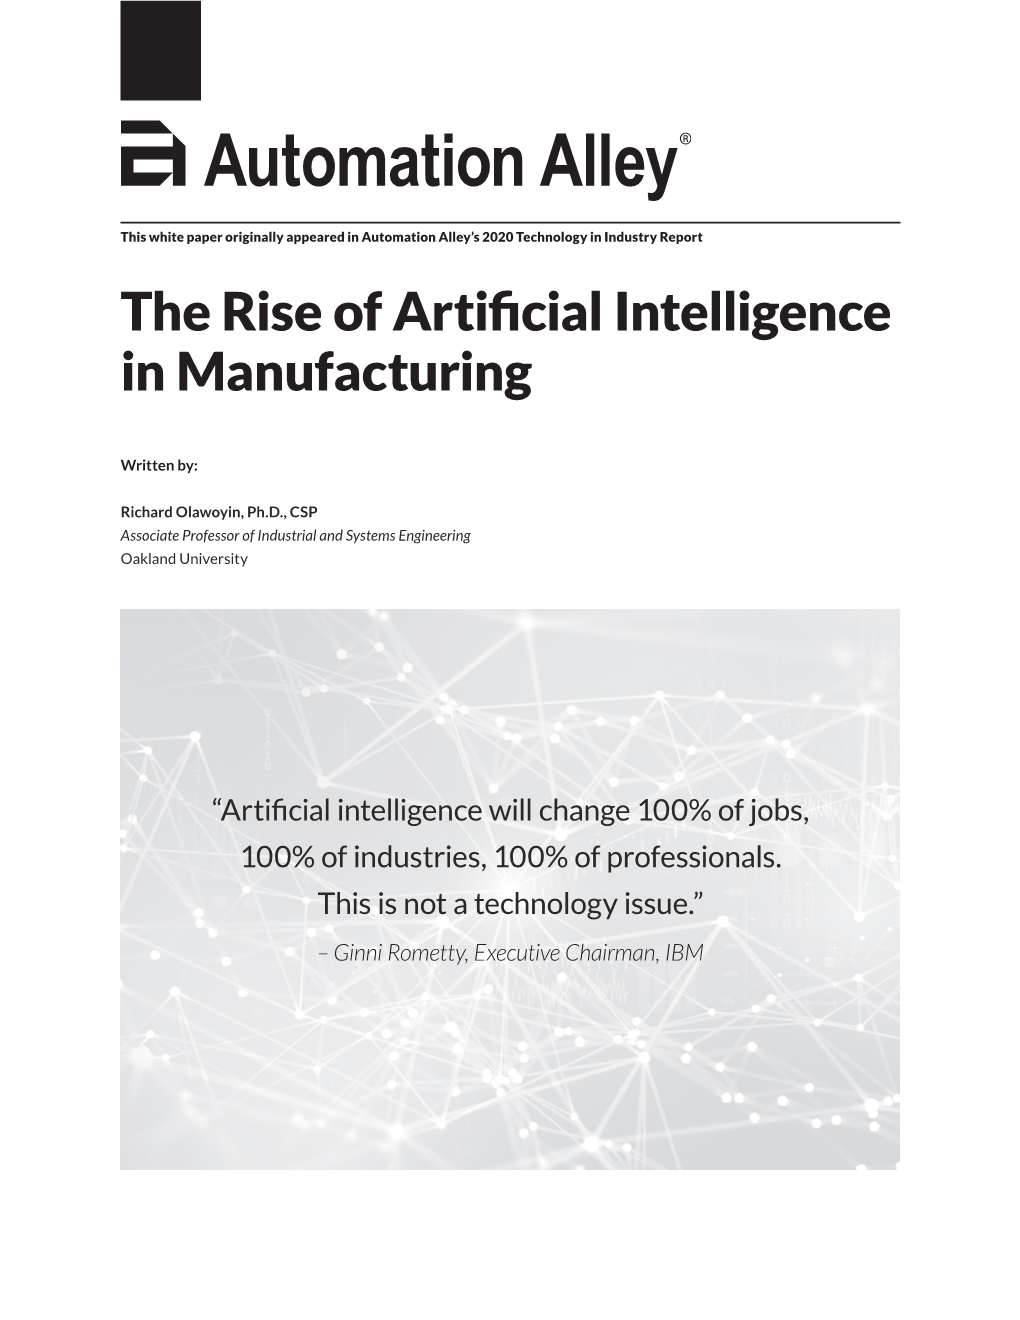 The Rise of Artificial Intelligence in Manufacturing